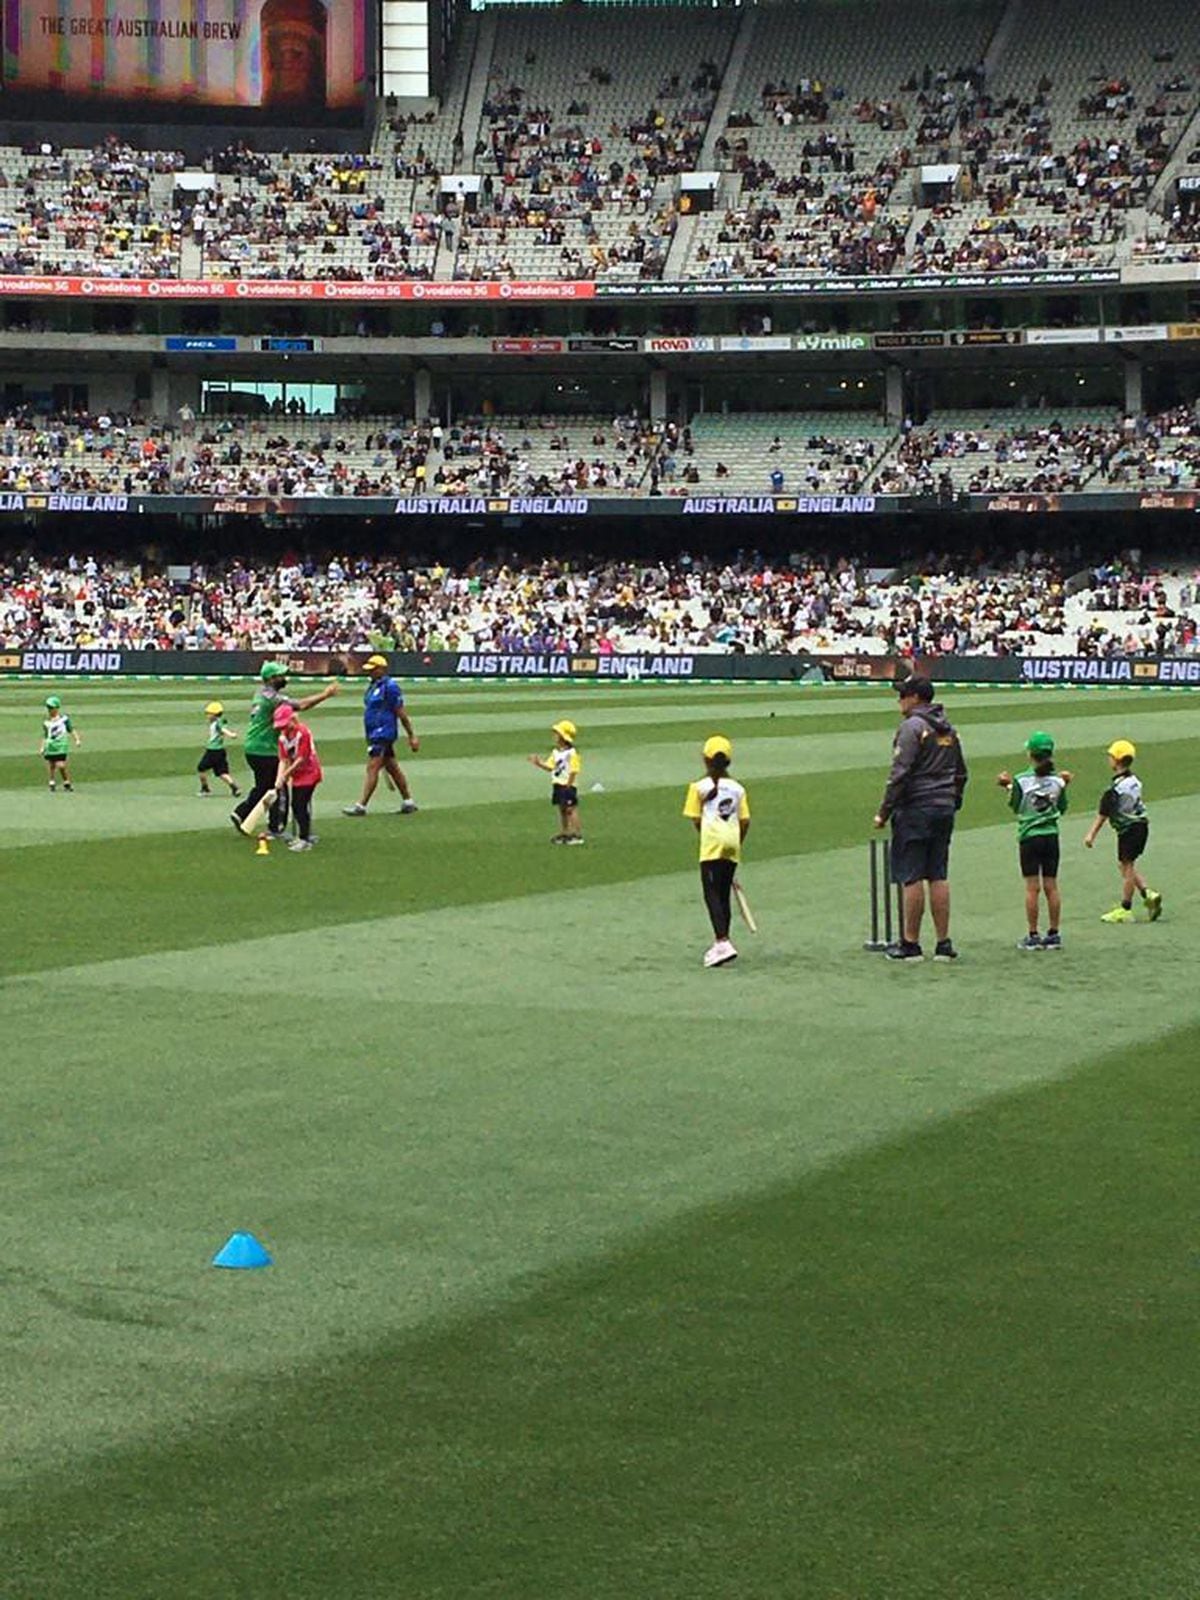 The junior game on the famous MCG pitch